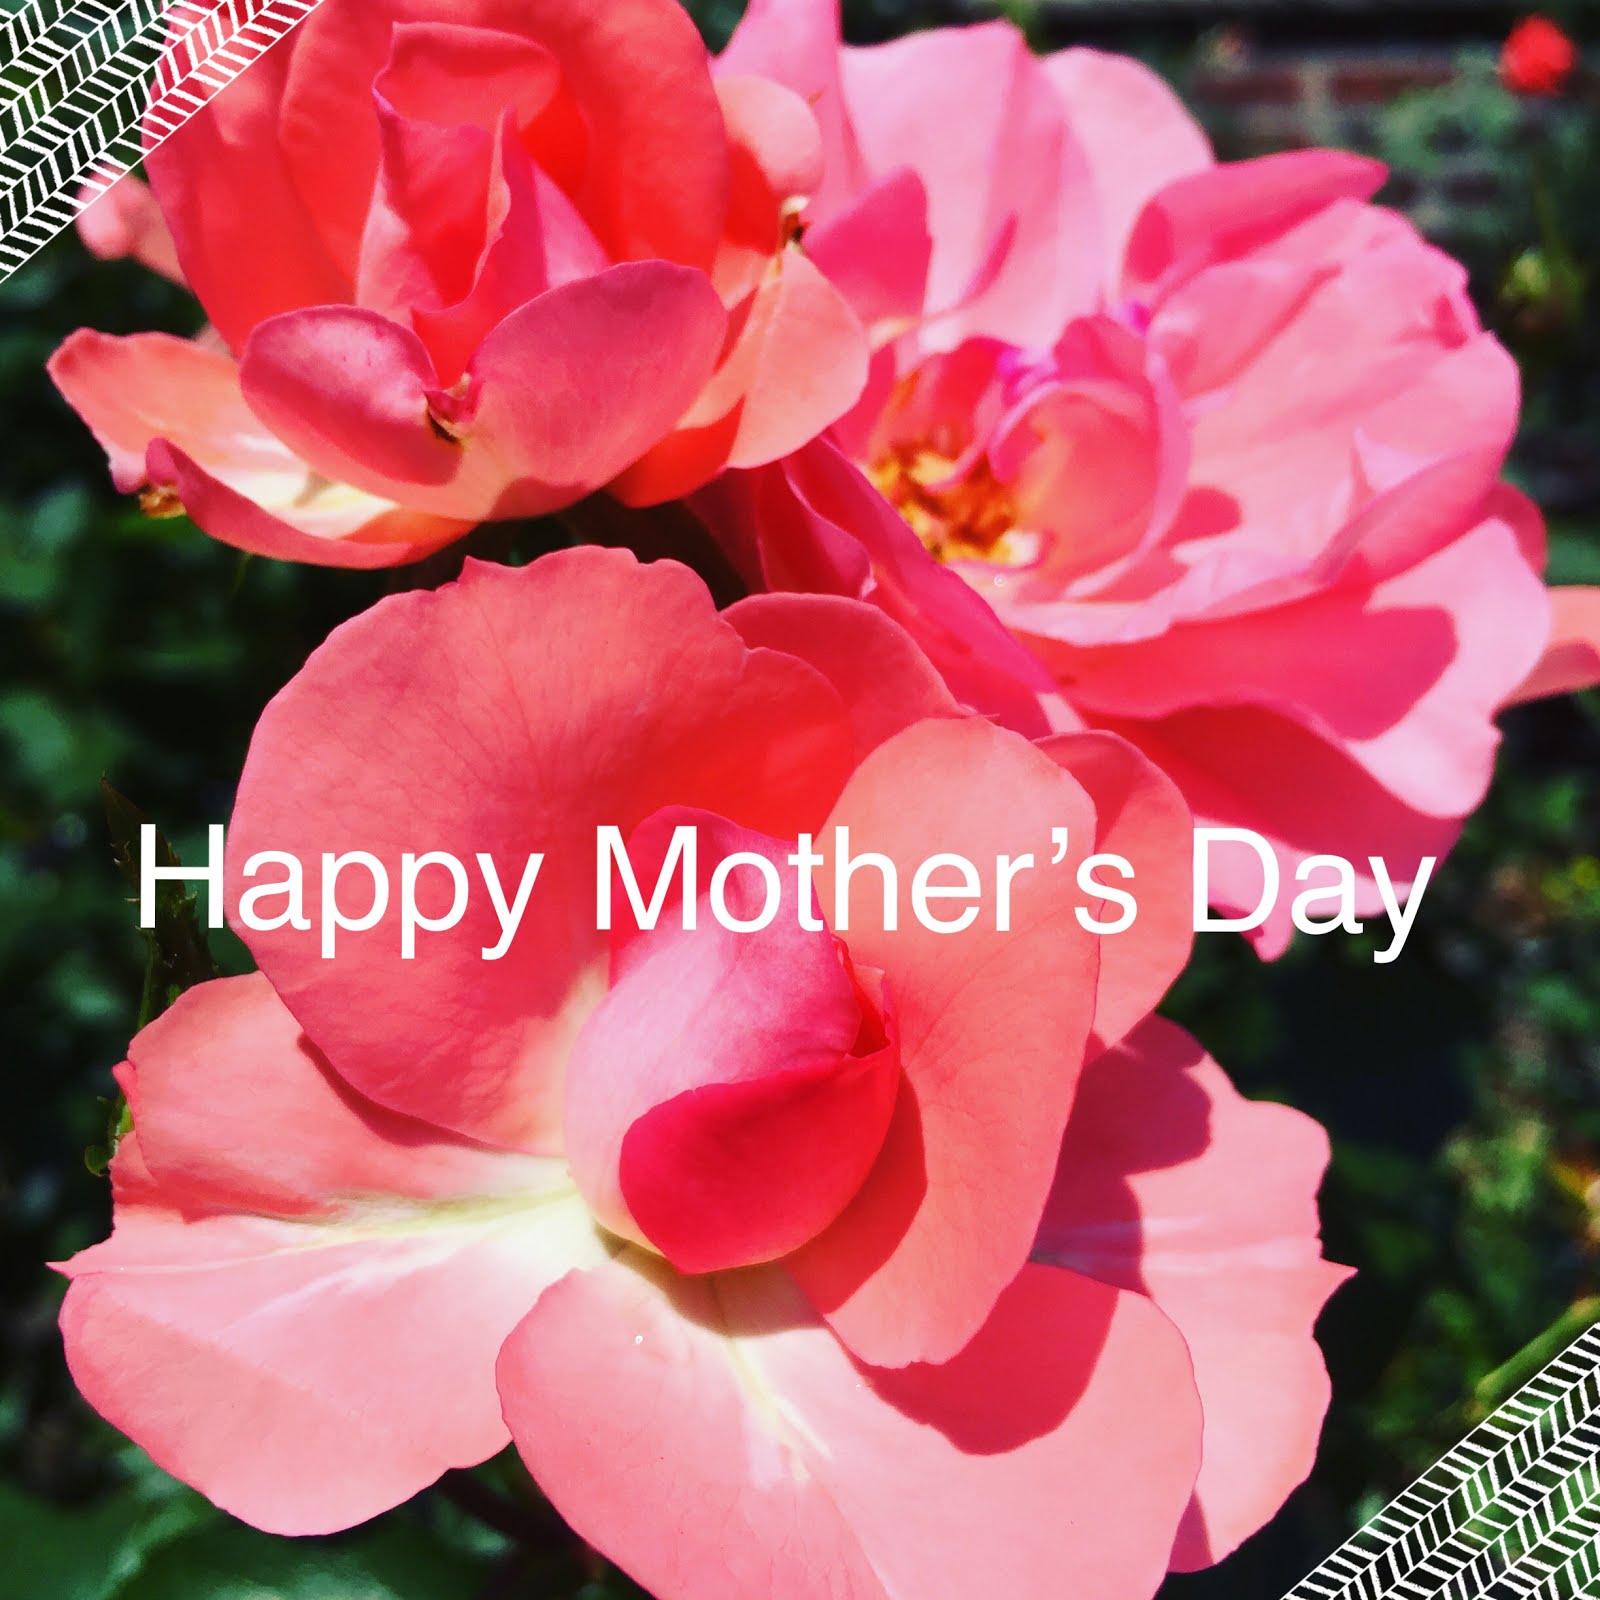 Mother's Day Wishes | Julie's Creative Lifestyle